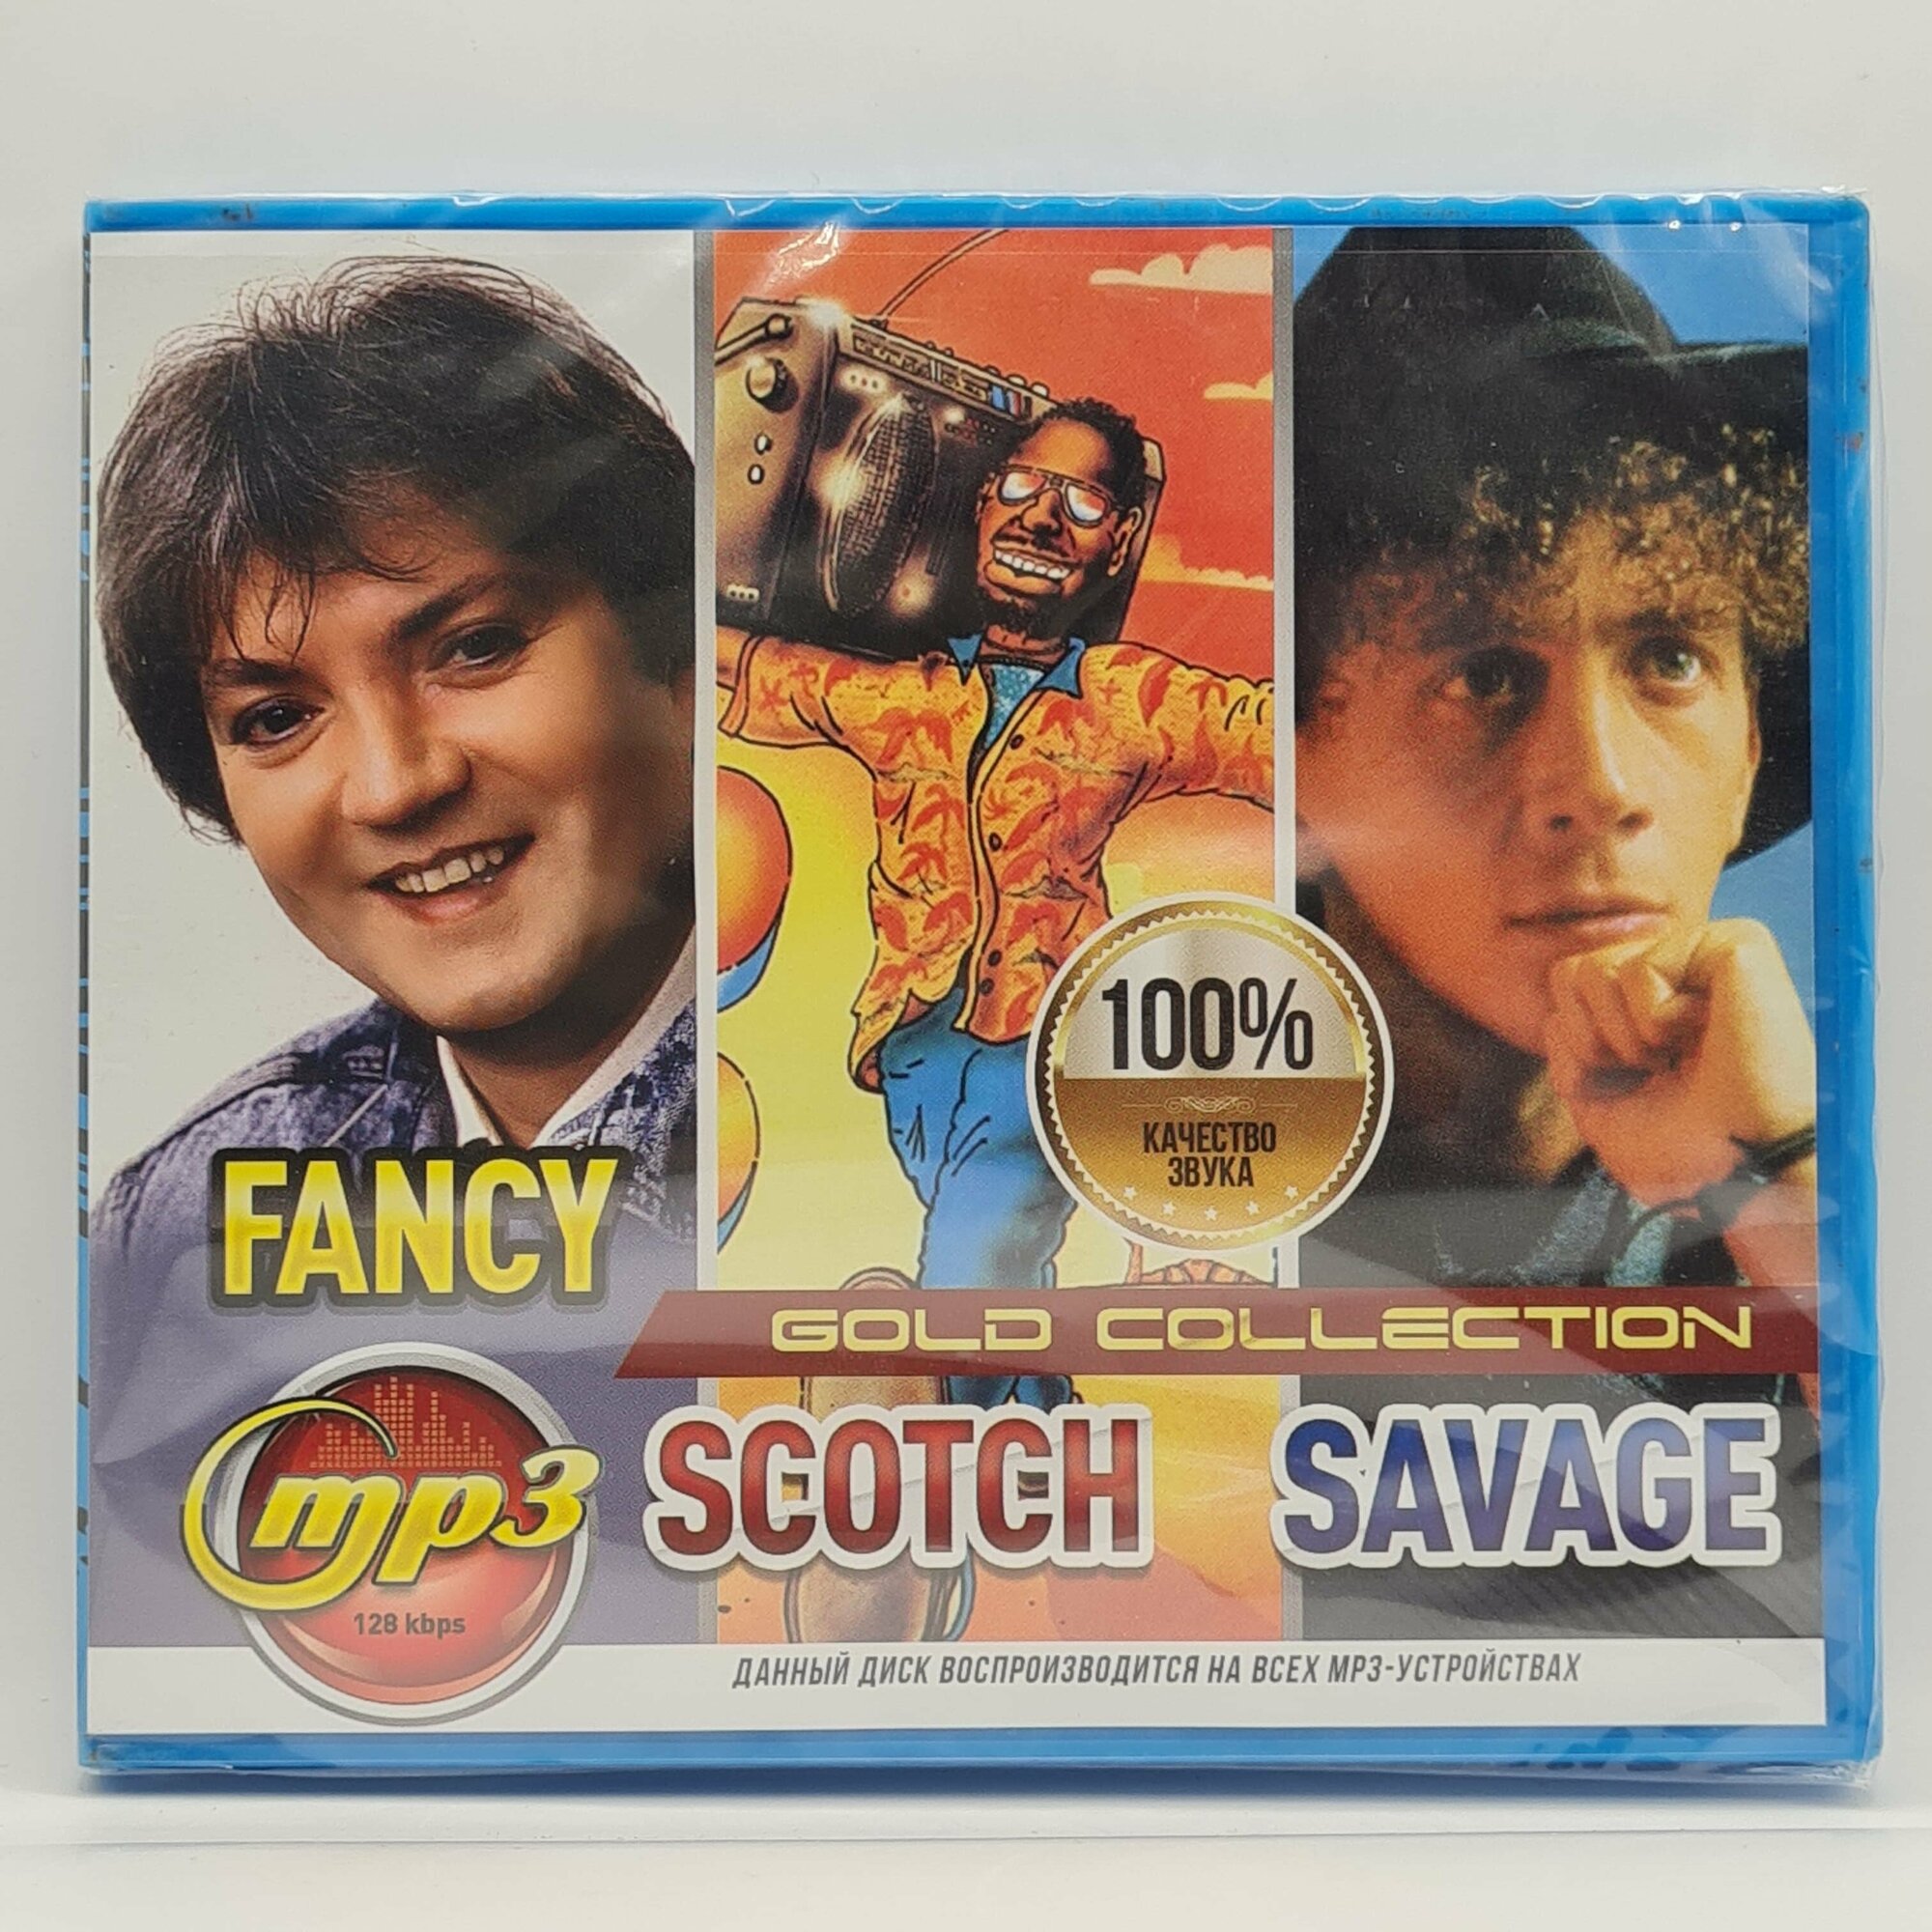 Fancy + Scotch + Savage Gold Collection (MP3)